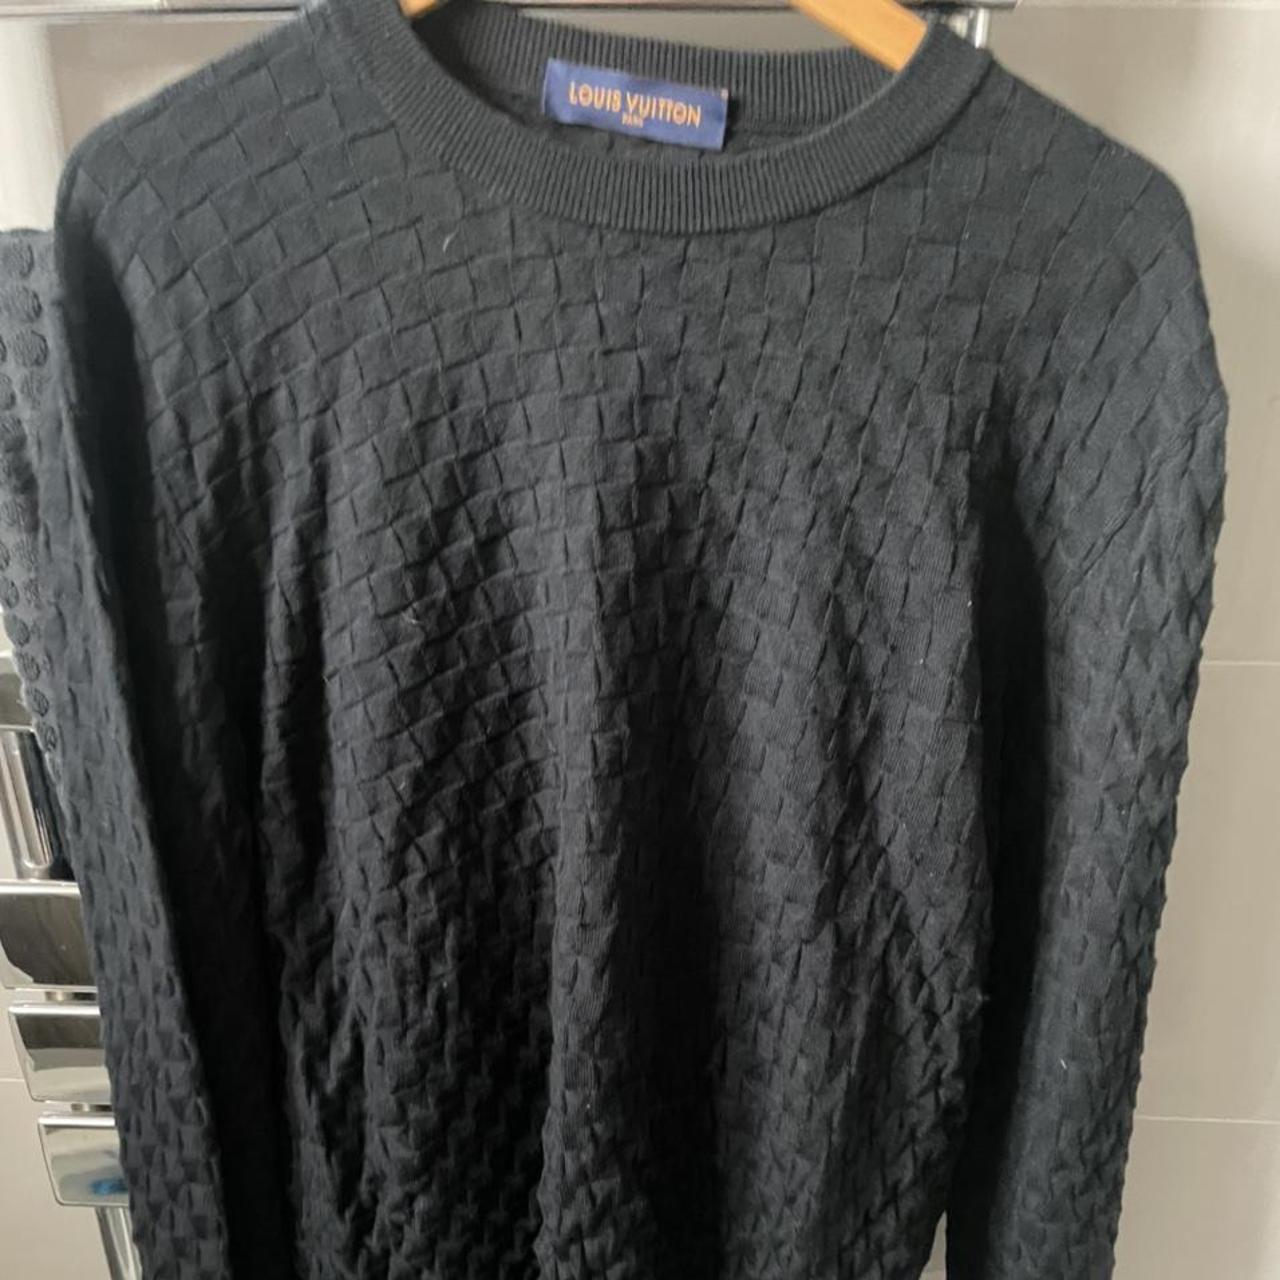 Louis Vuitton long sleeve in great condition - Depop